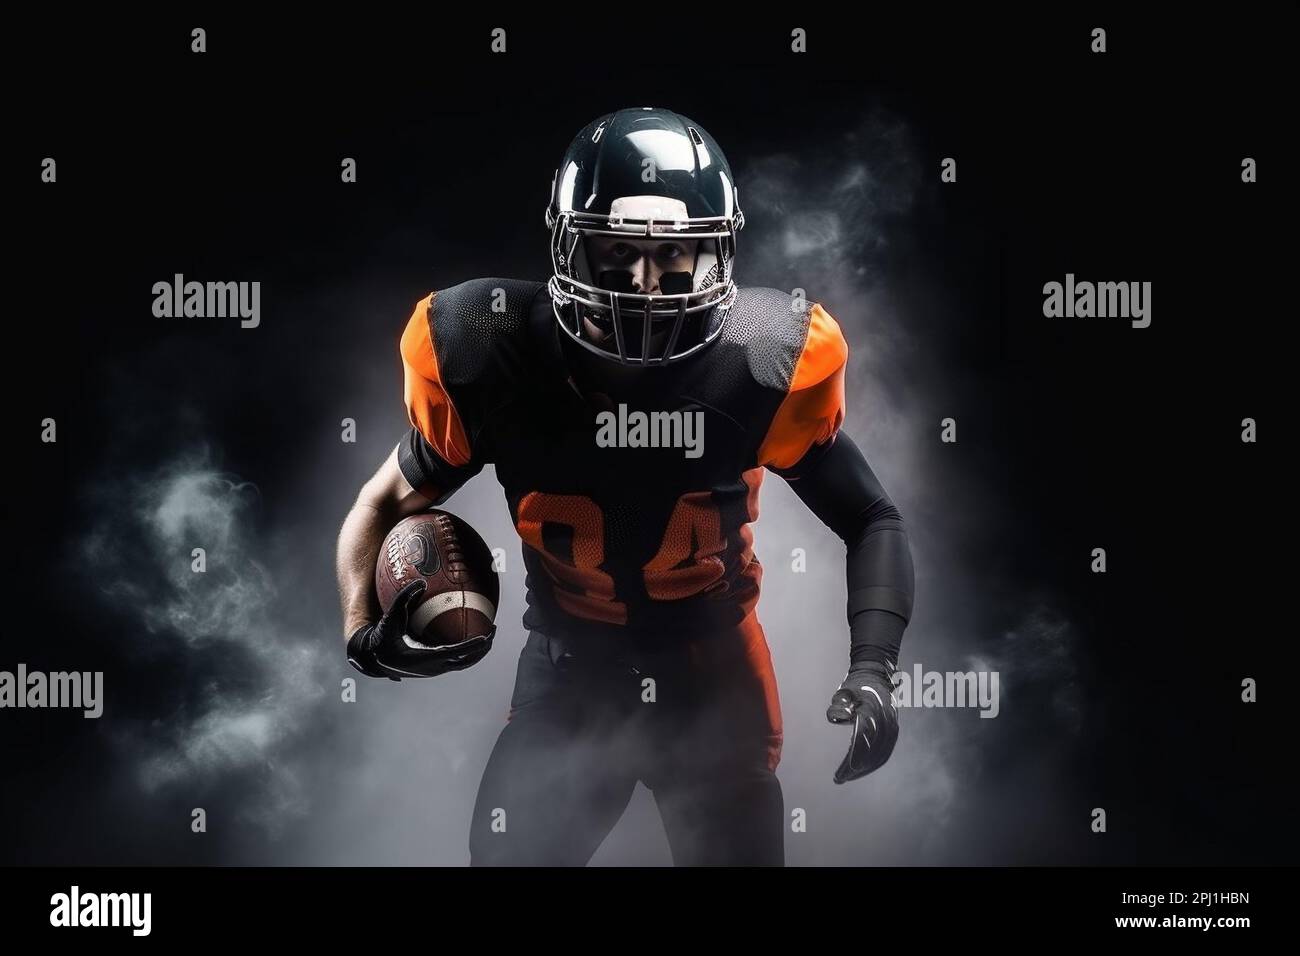 American football player on a dark background in smoke in black and orange equipment Stock Photo